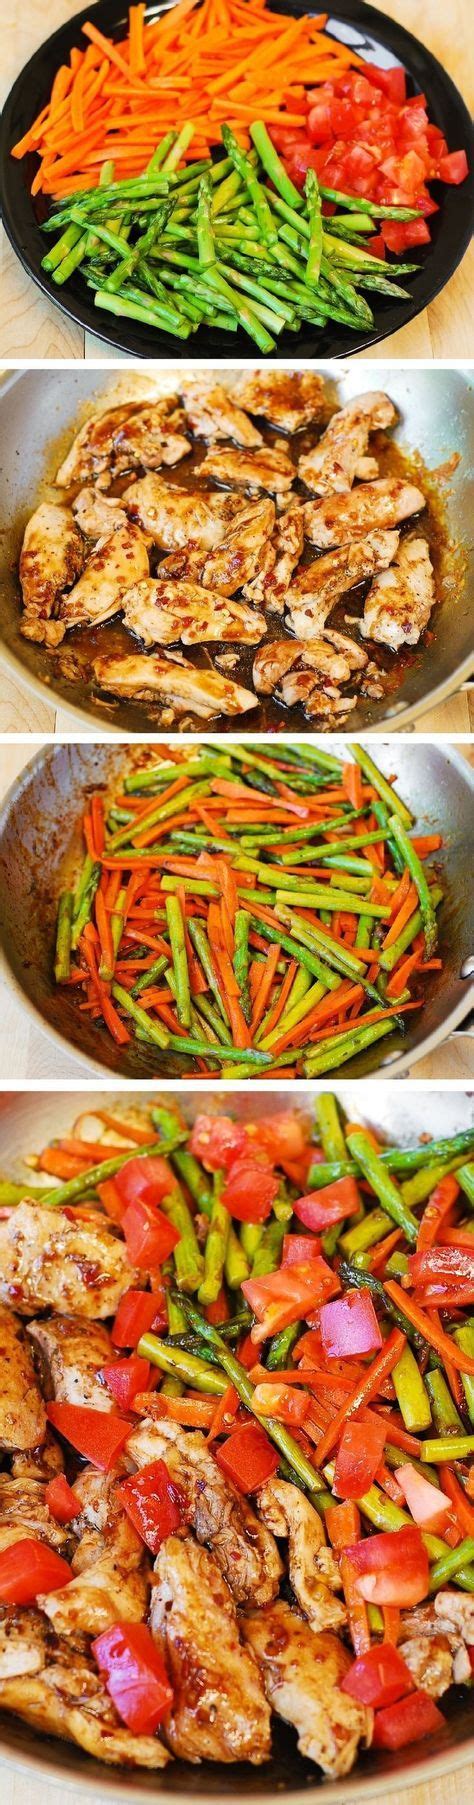 If you have high cholesterol, then these 10 low cholesterol diet recipes are for you! 30-Minute Meals for Quick, Healthy Dinner Ideas | Low ...